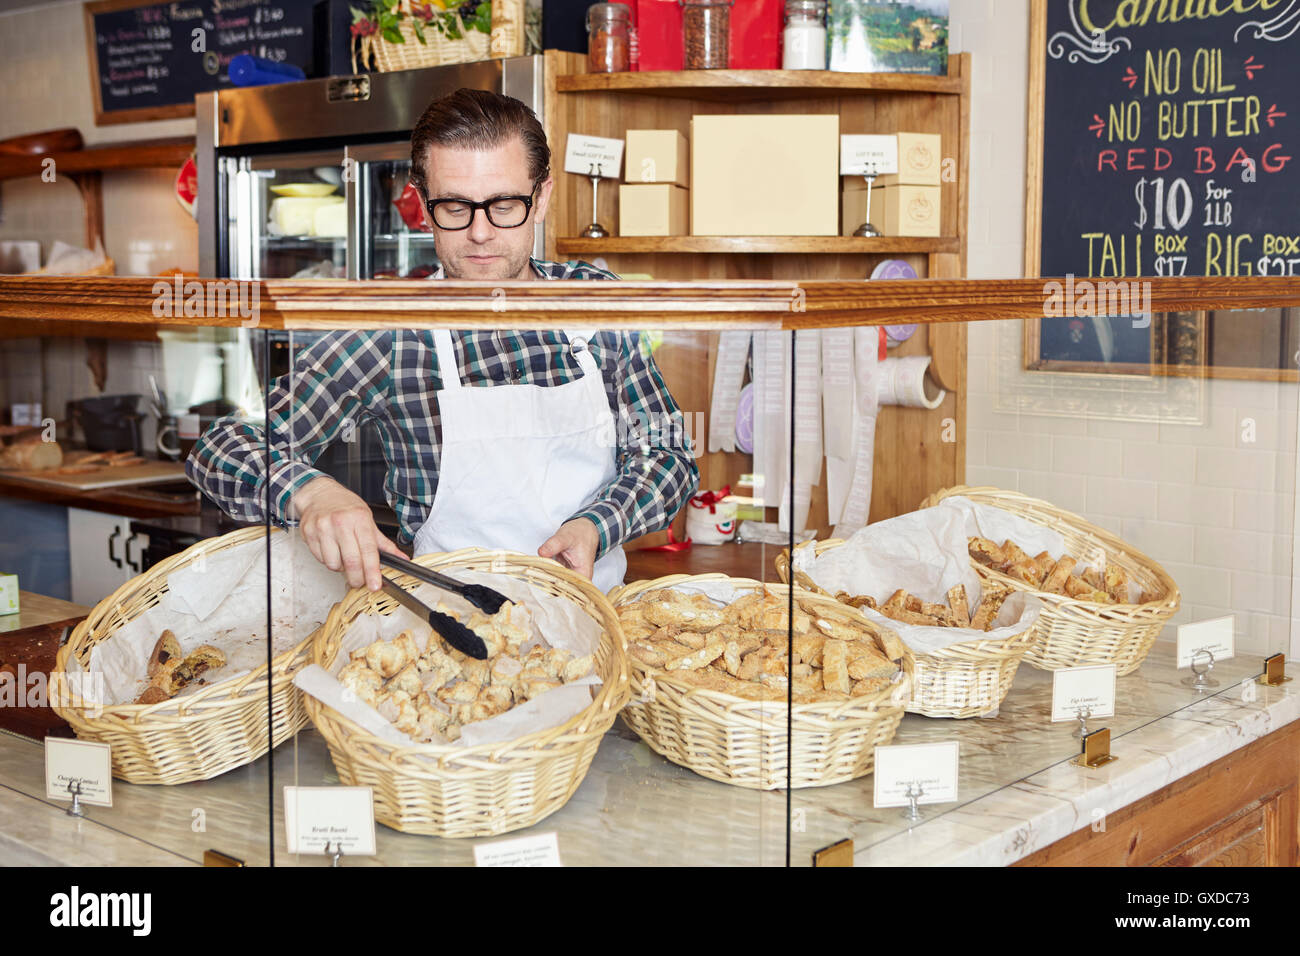 Male worker in bakery, taking fresh goods from basket Stock Photo